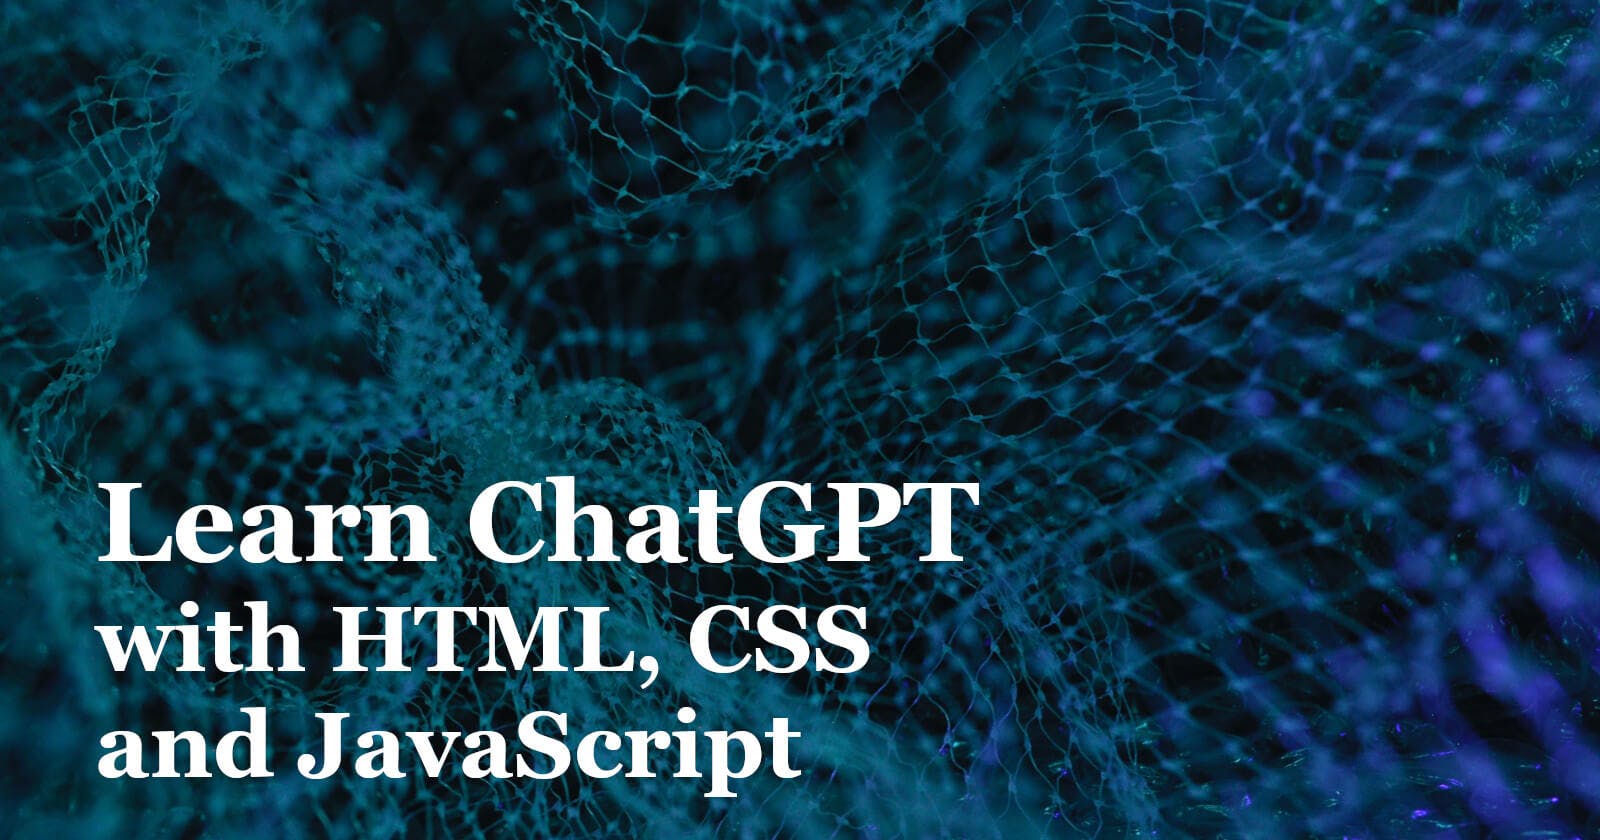 Learn ChatGPT In 15 Minutes with HTML, CSS and JavaScript